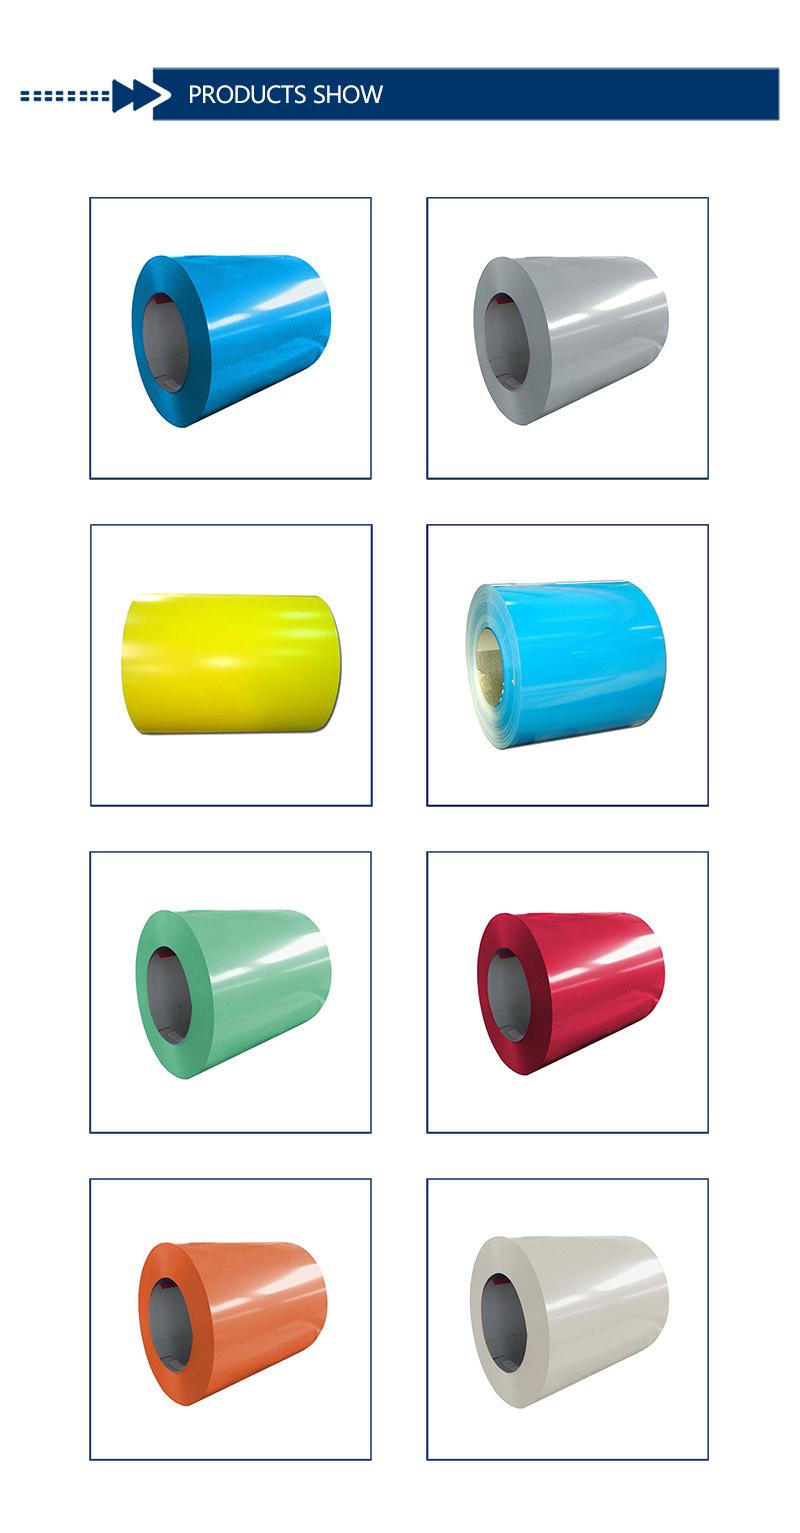 China PPGI PPGL Prime Color Coated Prepainted Galvanized PPGI Steel Sheet Coil Price From Shandong